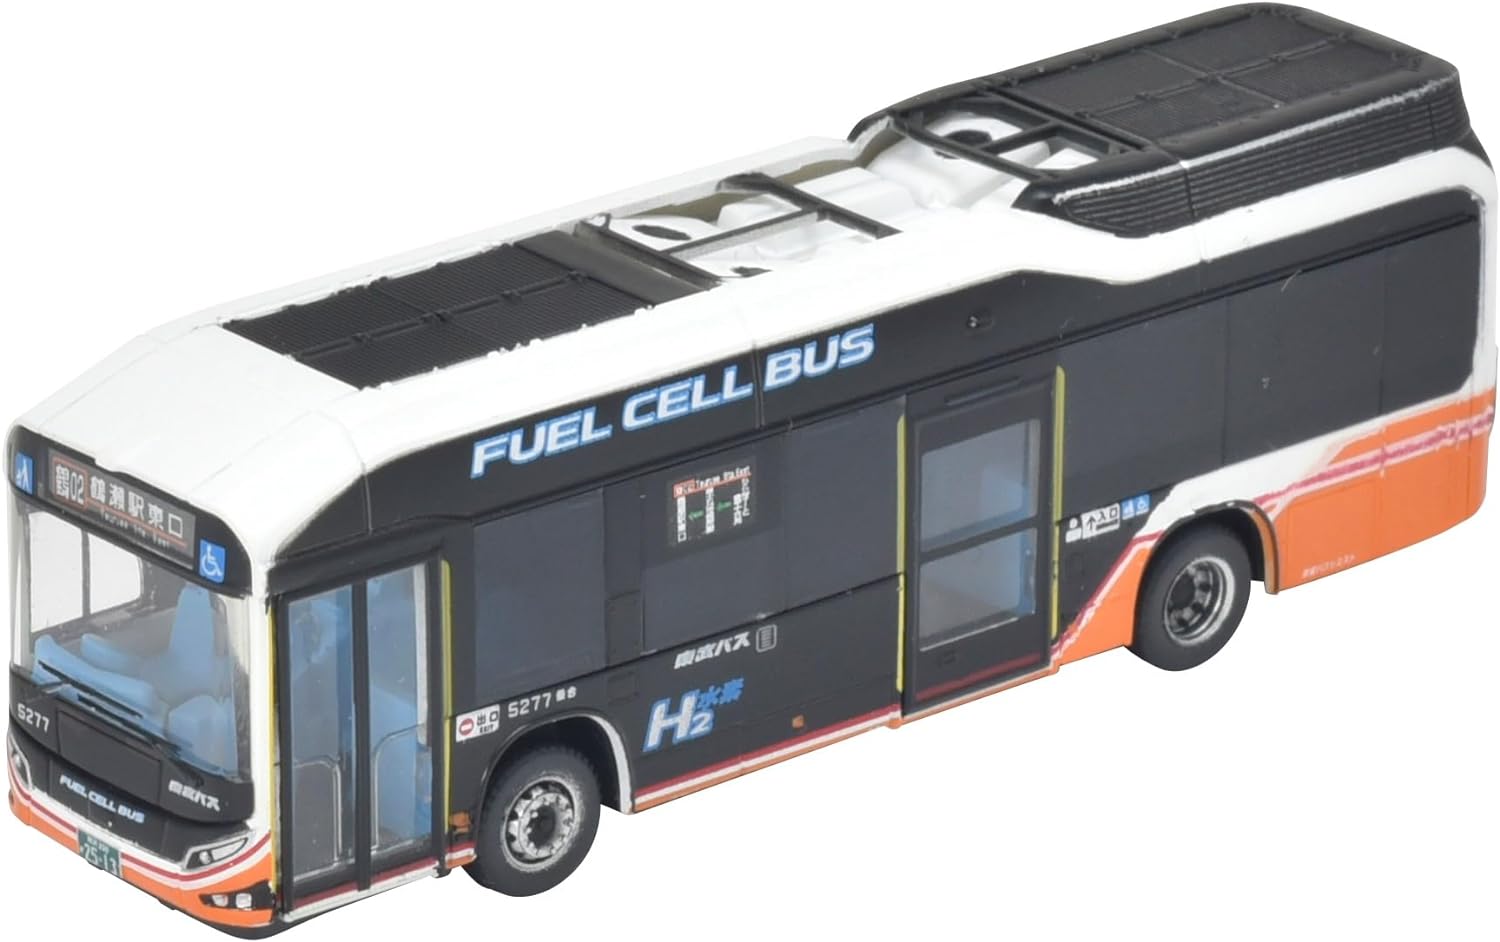 Tomytec The Bus Collection Bus Colle Driving System Toyota SORA Power Set, Tobu Bus Waist Specifications